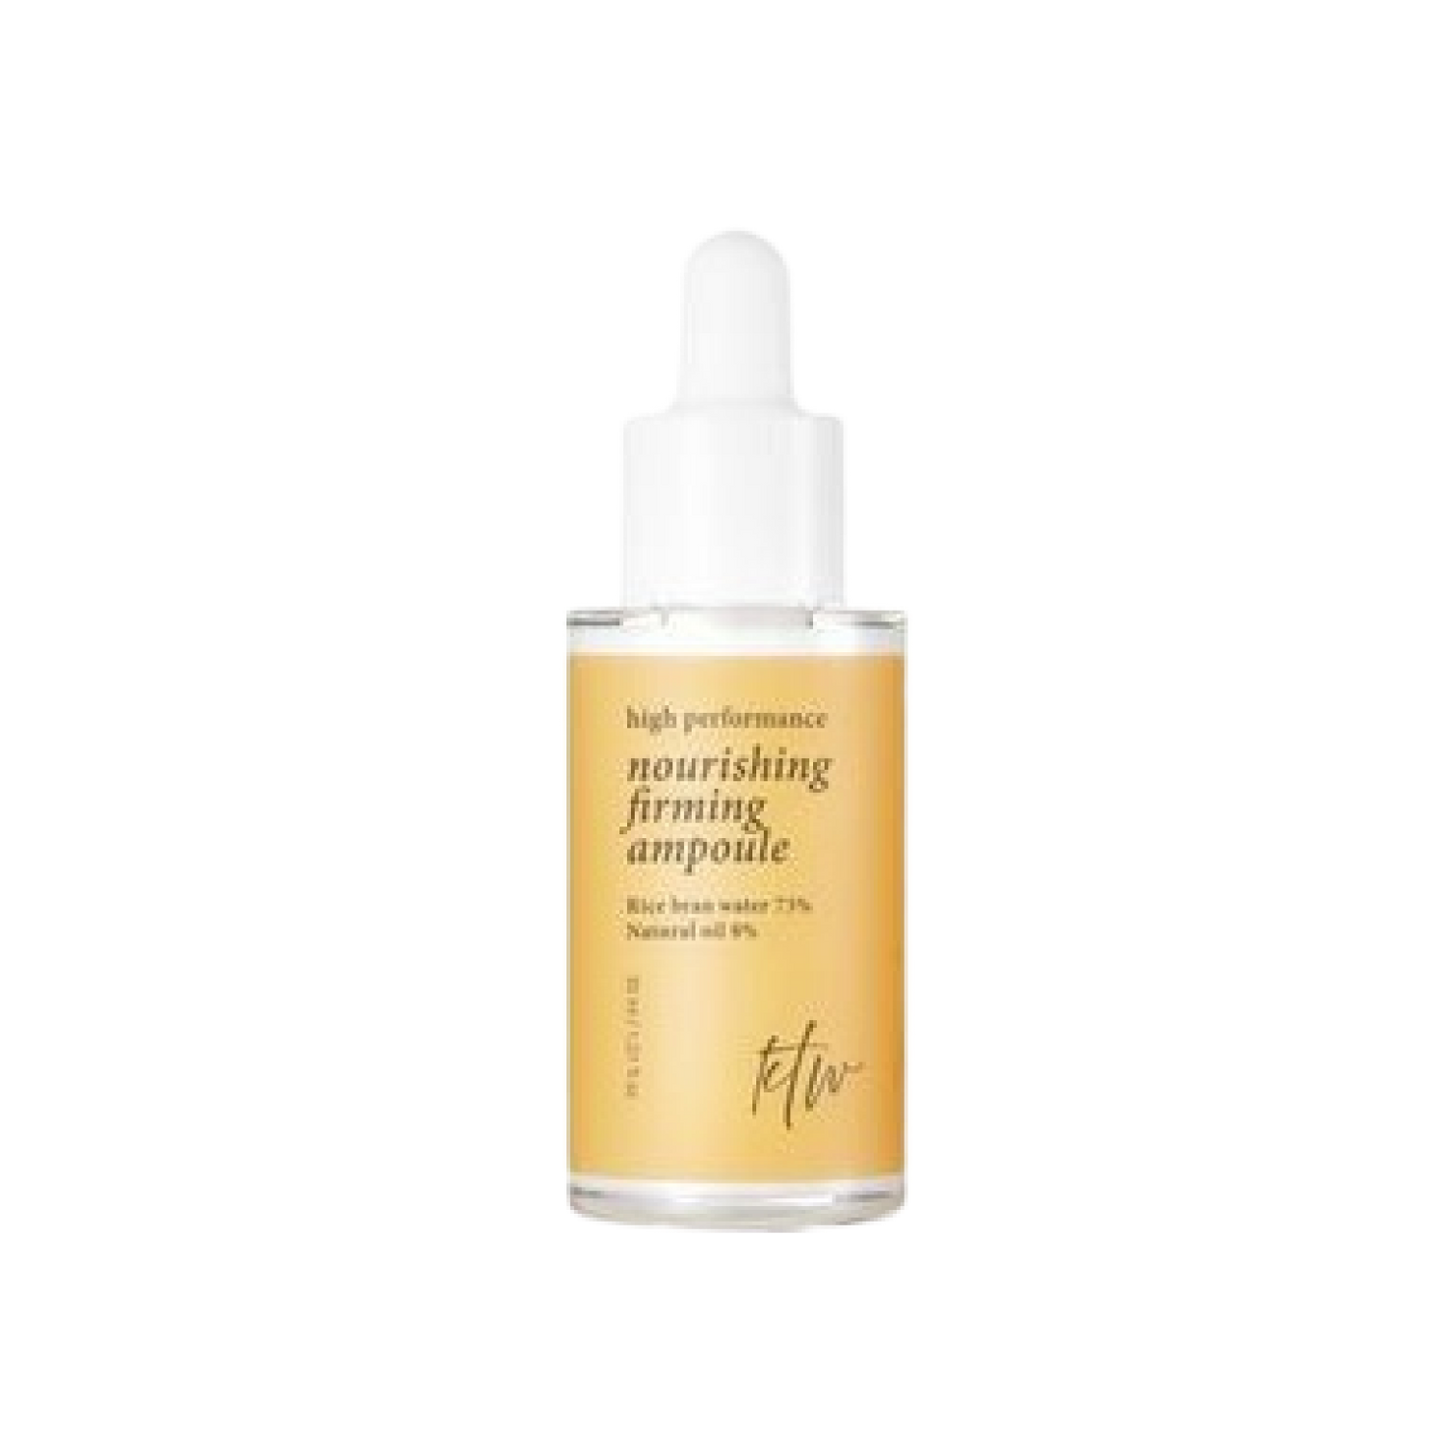 High Performance Nourishing Firming Ampoule 30 ml